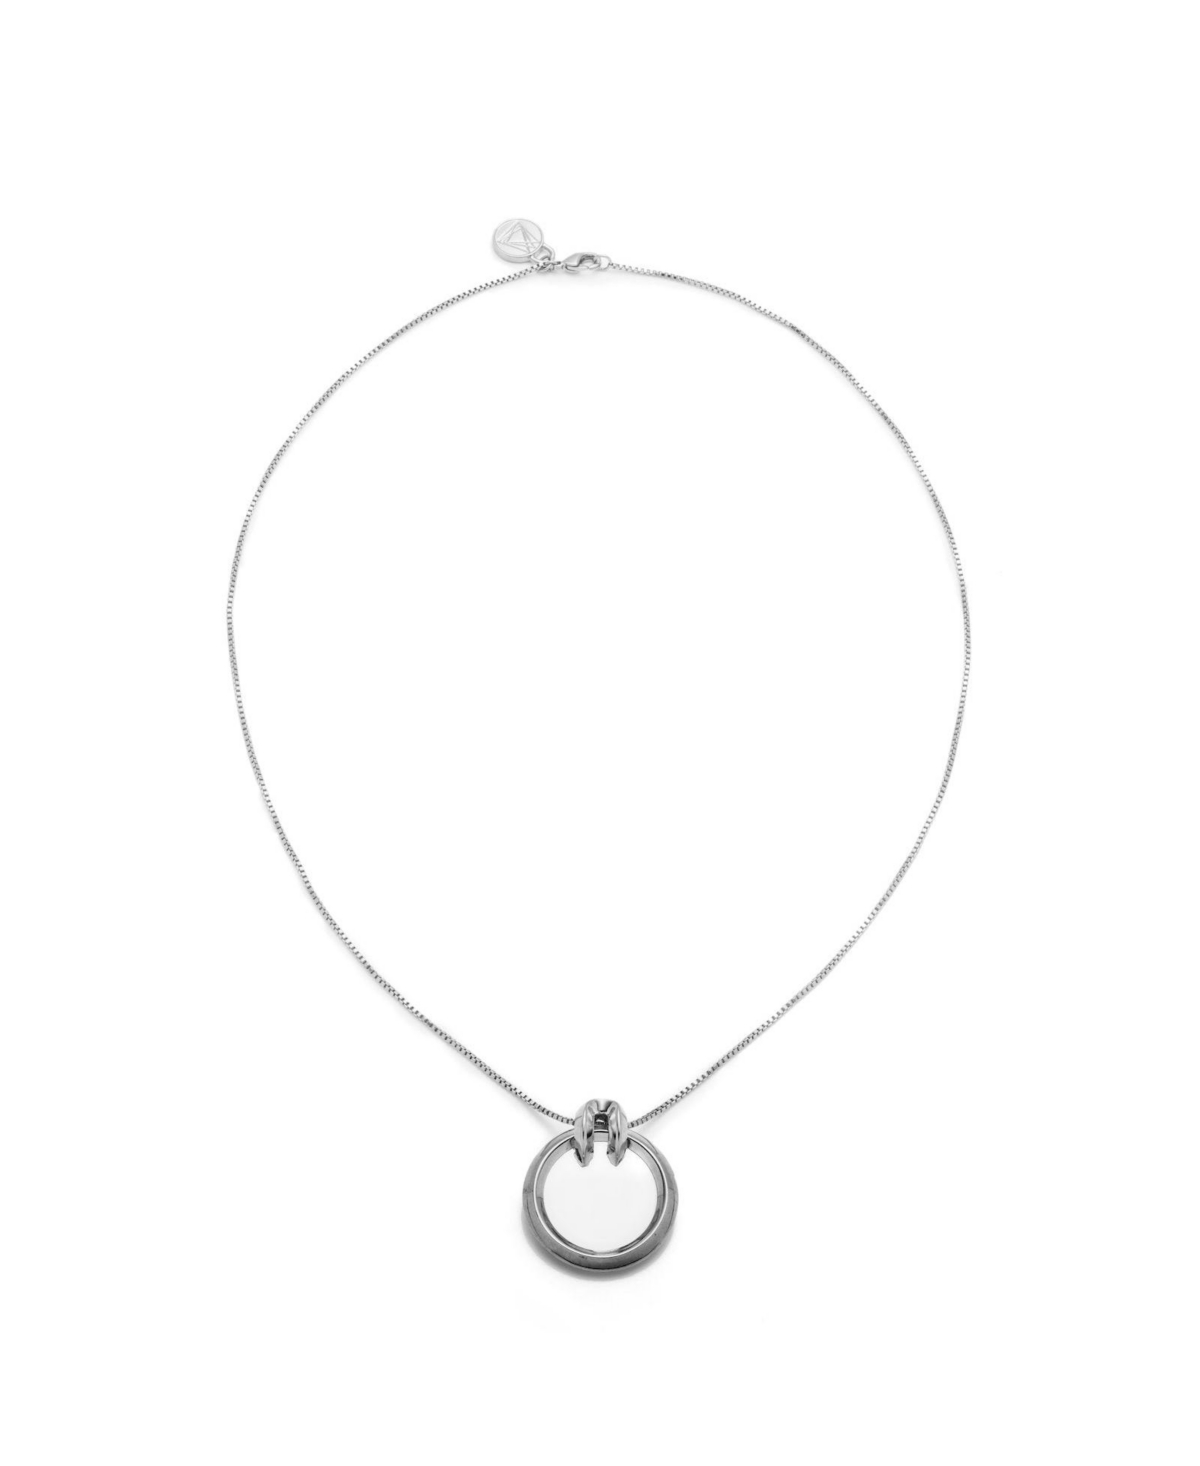 Marcy Pendant Necklace - Silver